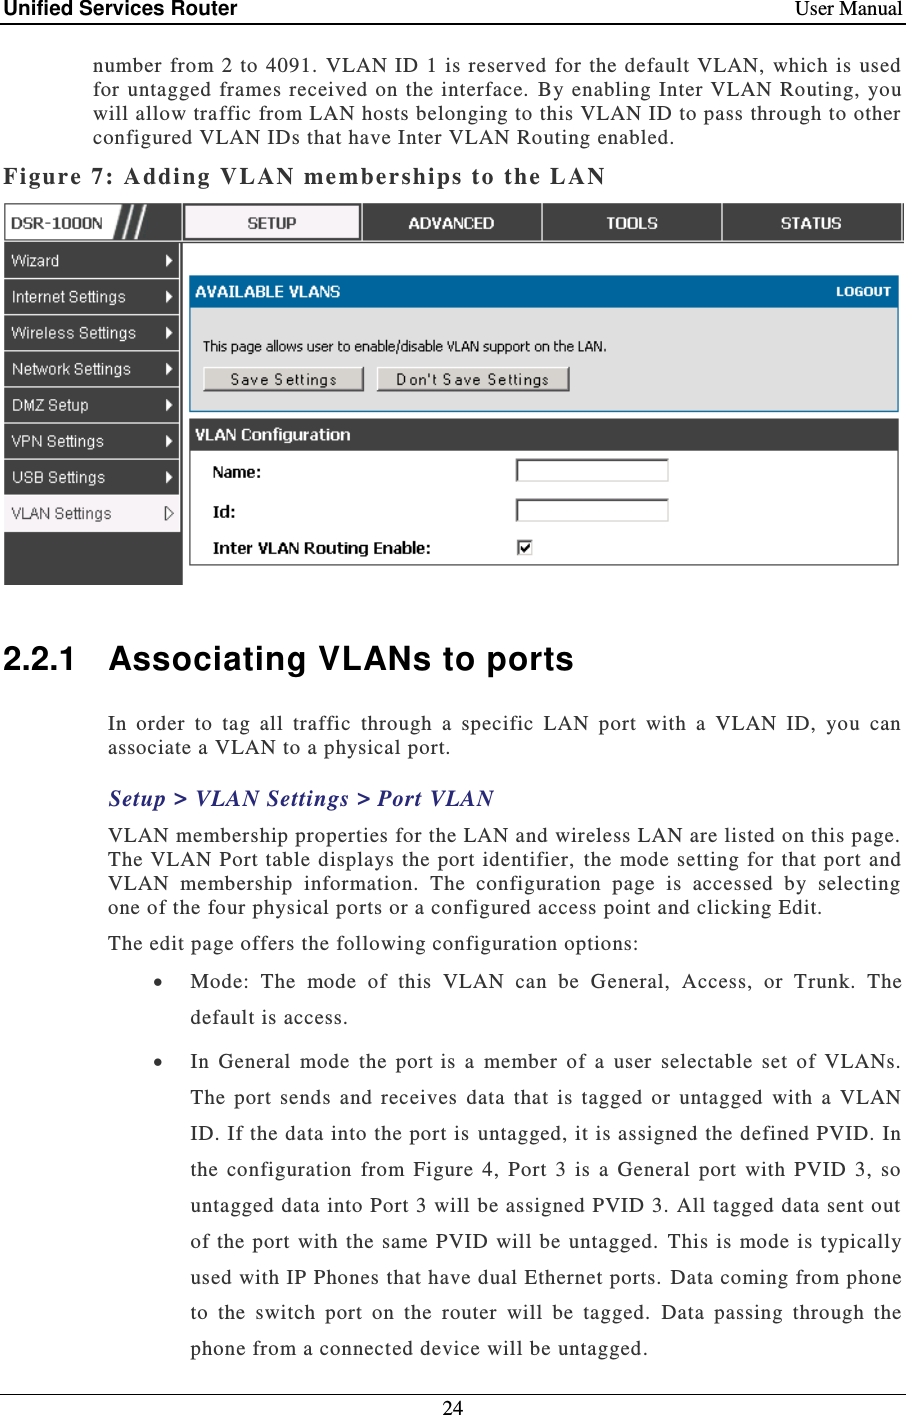 Unified Services Router    User Manual 24  number  from 2 to 4091. VLAN  ID 1 is reserved for the default VLAN,  which is  used for  untagged  frames received  on  the interface.  By enabling Inter VLAN  Routing,  you will allow traffic from LAN hosts belonging to this VLAN ID to pass through to other configured VLAN IDs that have Inter VLAN Routing enabled.   Figure 7: Addi ng  VLAN member ships to the LAN    2.2.1  Associating VLANs to ports In  order  to  tag  all  traffic  through  a  specific  LAN  port  with  a  VLAN  ID,  you  can associate a VLAN to a physical port.  Setup &gt; VLAN Settings &gt; Port VLAN VLAN membership properties for the LAN and wireless LAN are listed on this page.  The VLAN  Port table displays the port  identifier, the  mode setting for that  port and VLAN  membership  information.  The  configuration  page  is  accessed  by  selecting one of the four physical ports or a configured access point and clicking Edit.   The edit page offers the following configuration options:   Mode:  The  mode  of  this  VLAN  can  be  General,  Access,  or  Trunk.  The default is access.  In  General  mode  the  port is  a  member  of  a  user  selectable  set  of  VLANs.  The  port  sends  and  receives  data  that  is  tagged  or  untagged  with  a  VLAN ID. If the data into the port is untagged, it is assigned the defined PVID. In the  configuration  from  Figure  4,  Port  3  is  a  General  port  with  PVID  3,  so untagged data into Port 3 will be assigned PVID 3. All tagged data sent out of  the port  with the same PVID  will be untagged.  This is mode is  typically used with IP Phones that have dual Ethernet ports. Data coming from phone to  the  switch  port  on  the  router  will  be  tagged.   Data  passing  through  the phone from a connected device will be untagged. 